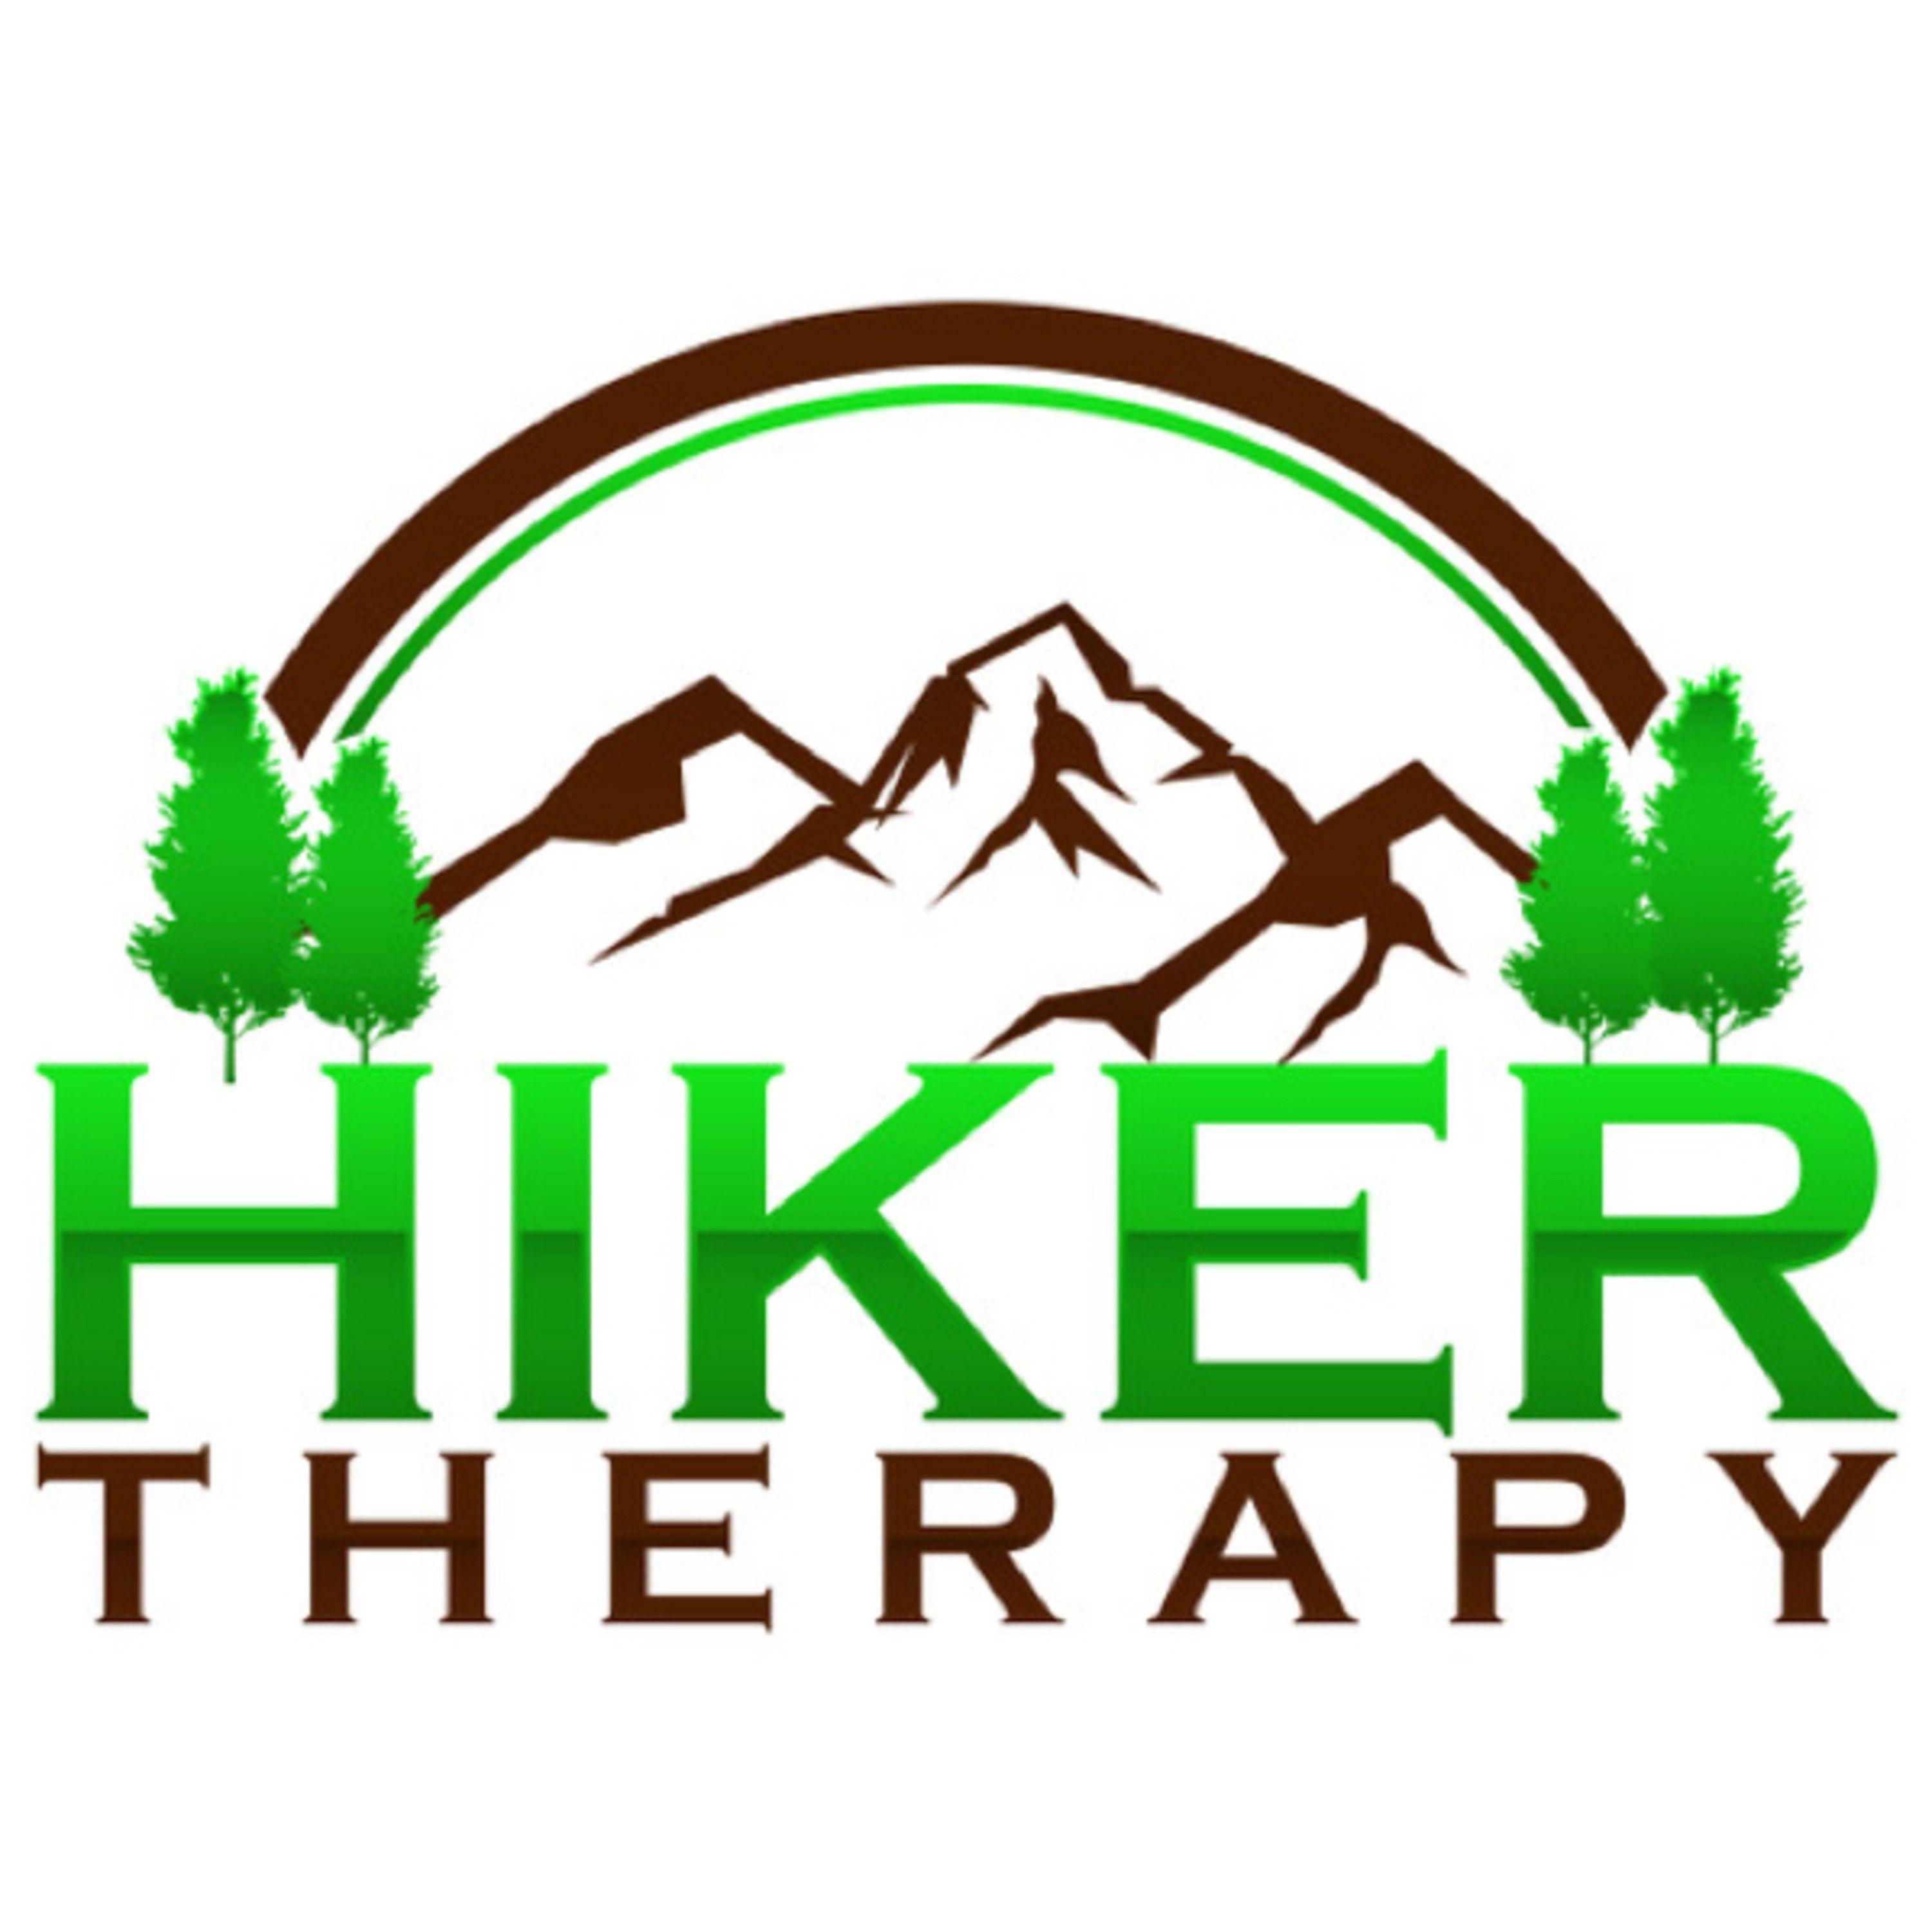 Hiker Logo - Hiker Therapy LIfe Coaching. Listen via Stitcher for Podcasts